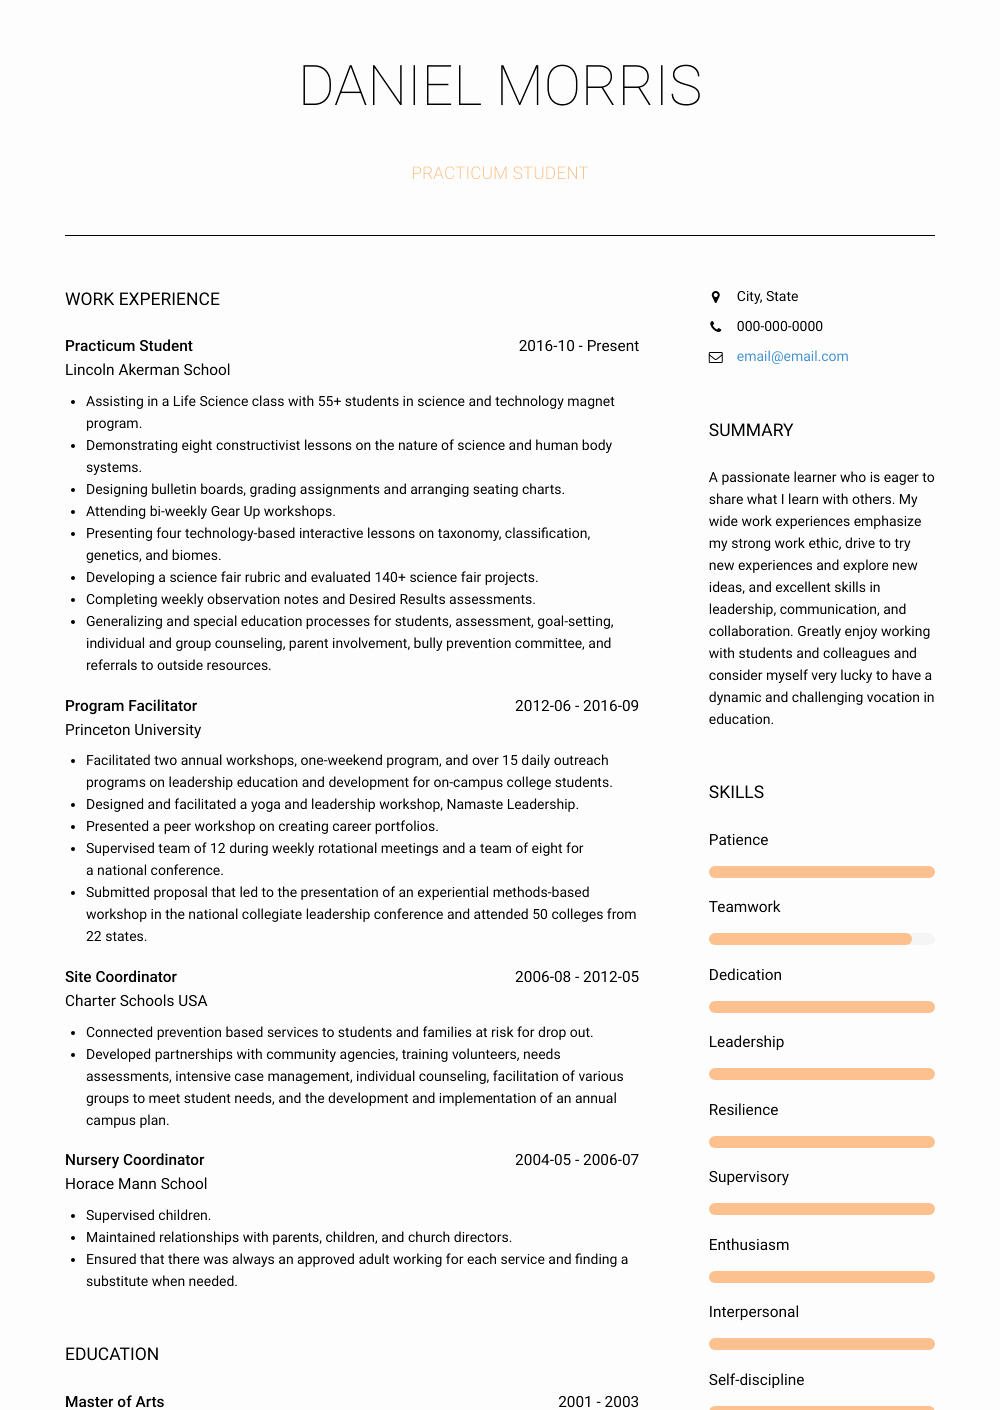 Cv Samples for Students New Practicum Student Resume Samples and Templates